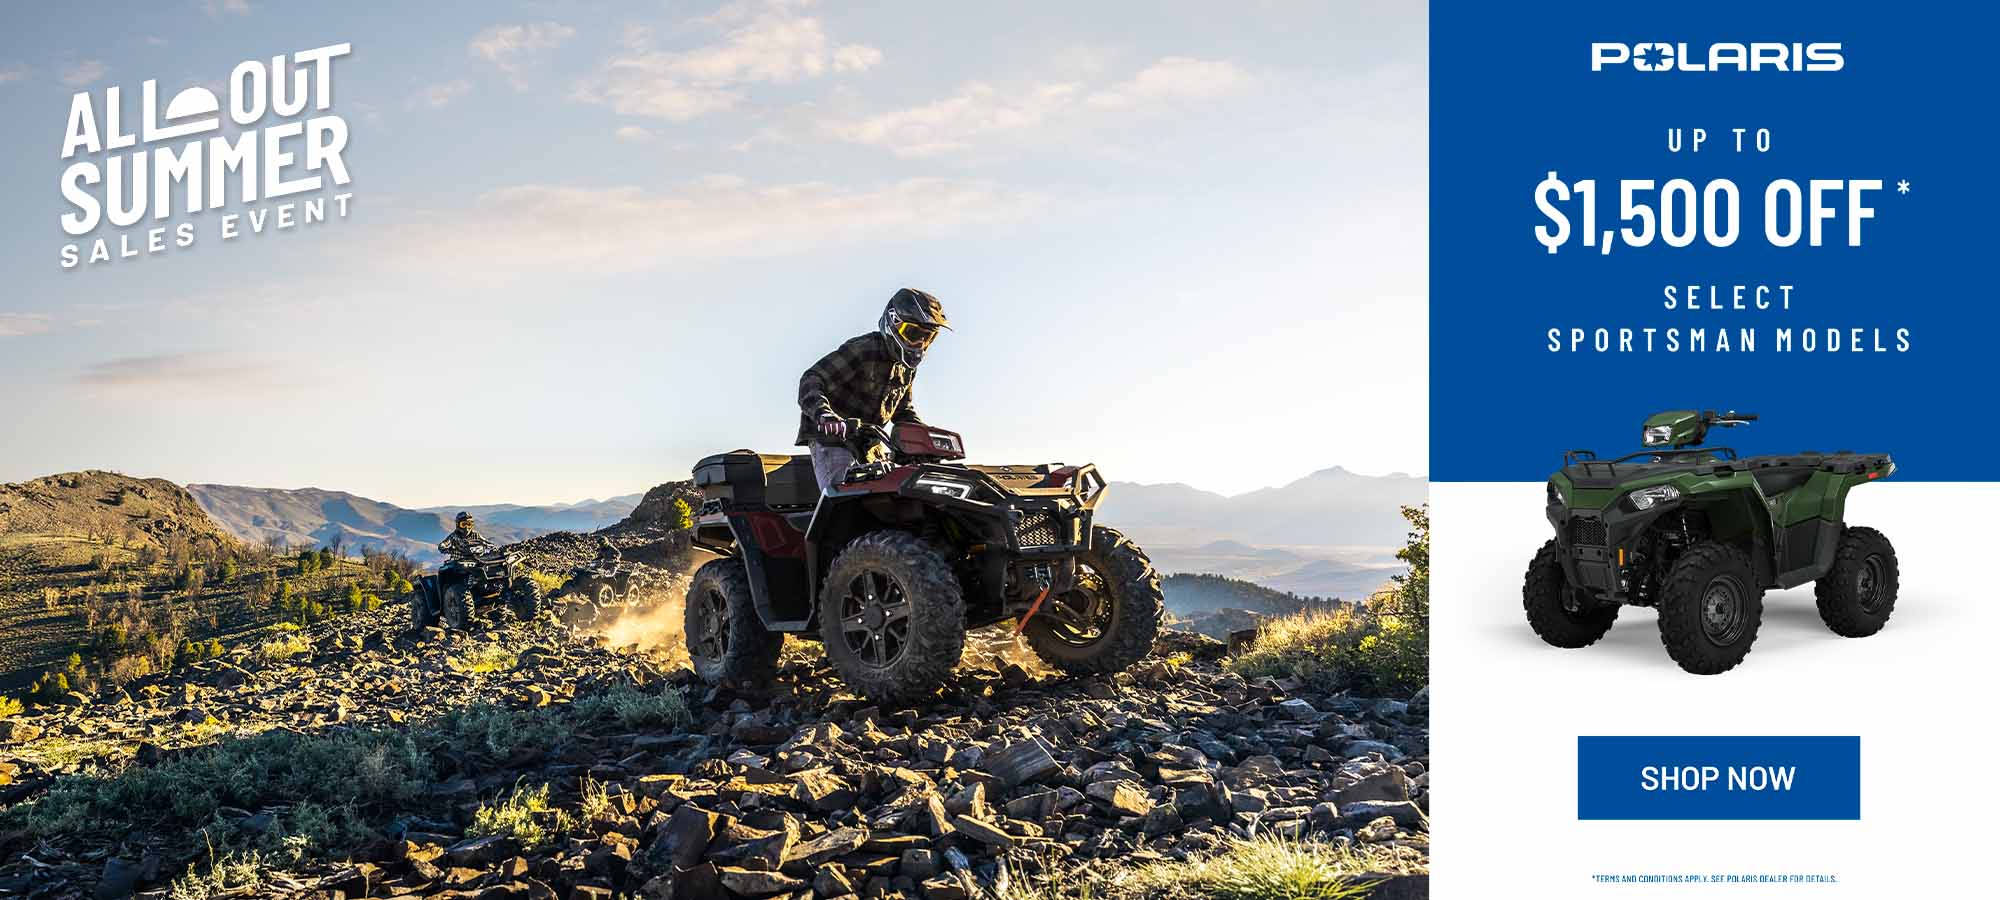 Polaris US - All Out Summer Sales Event - ATV at High Point Power Sports